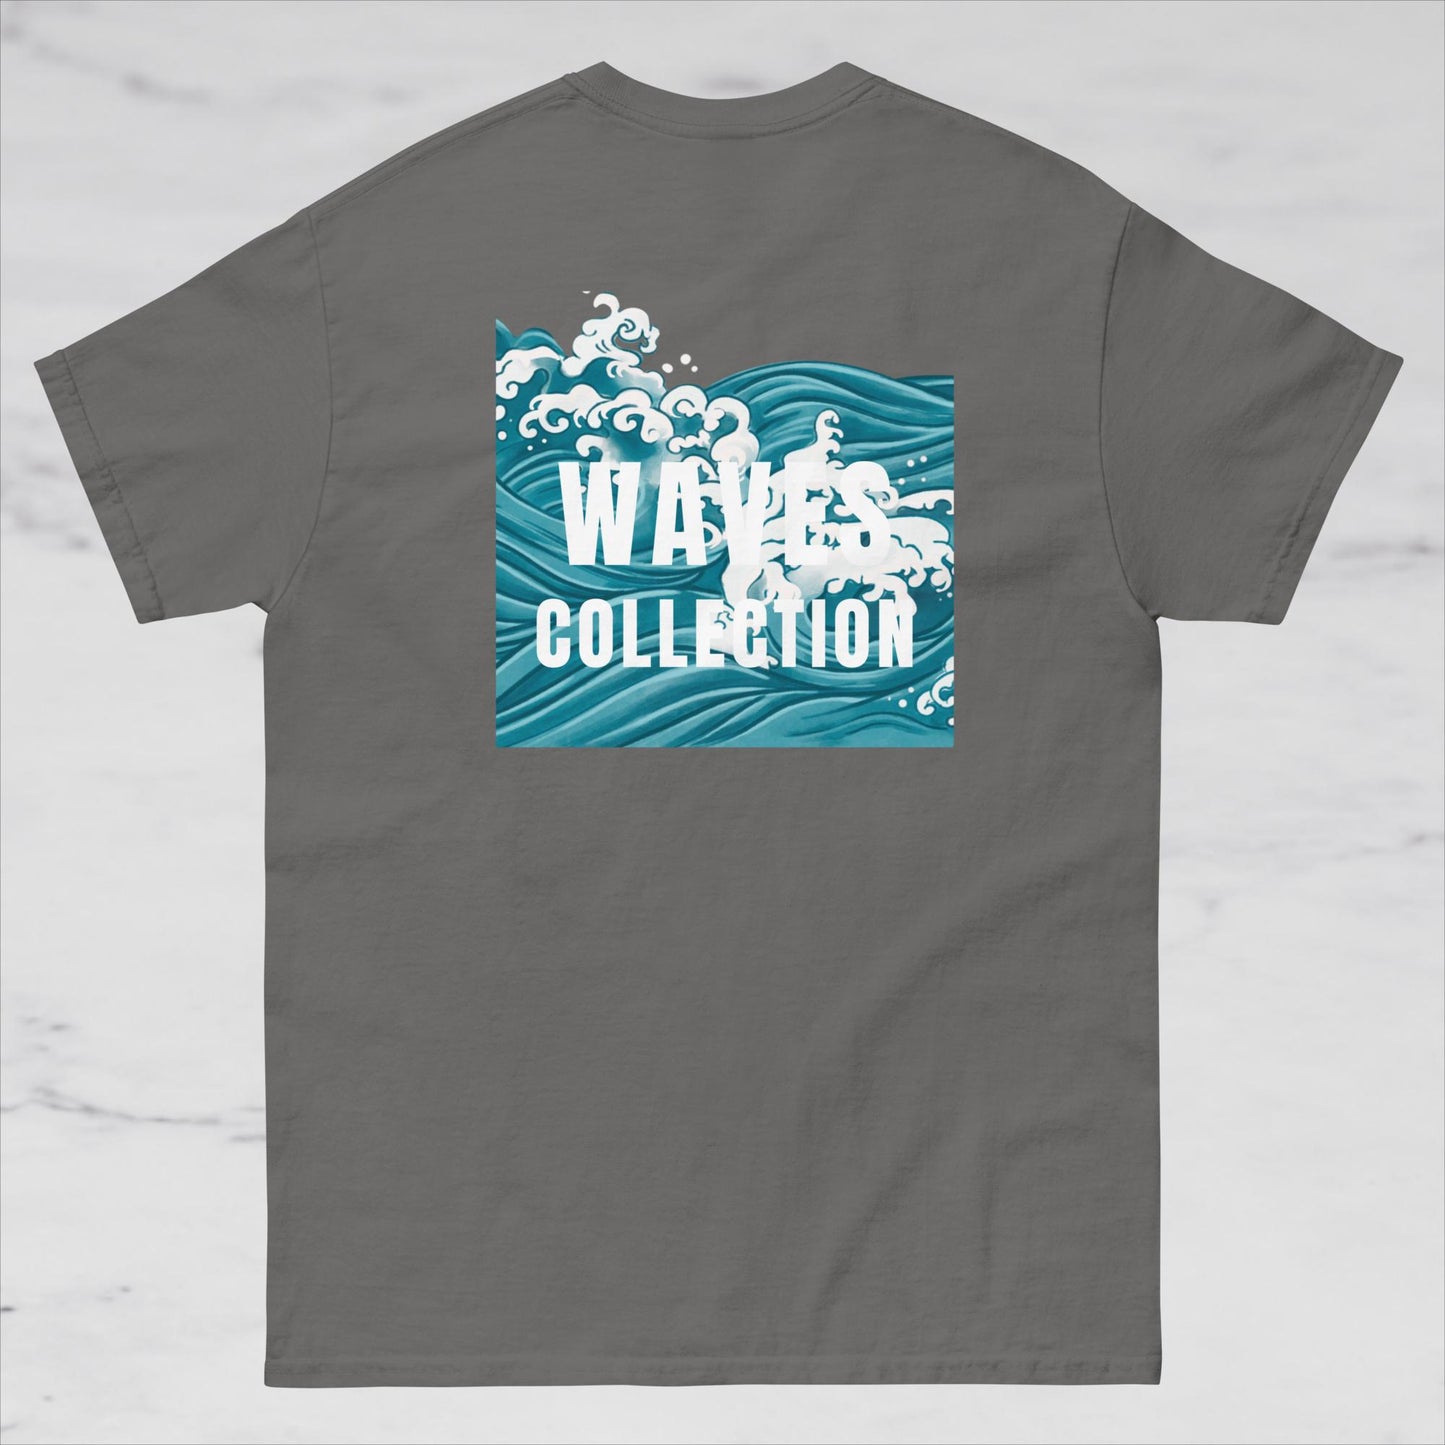 Washed WC Tee